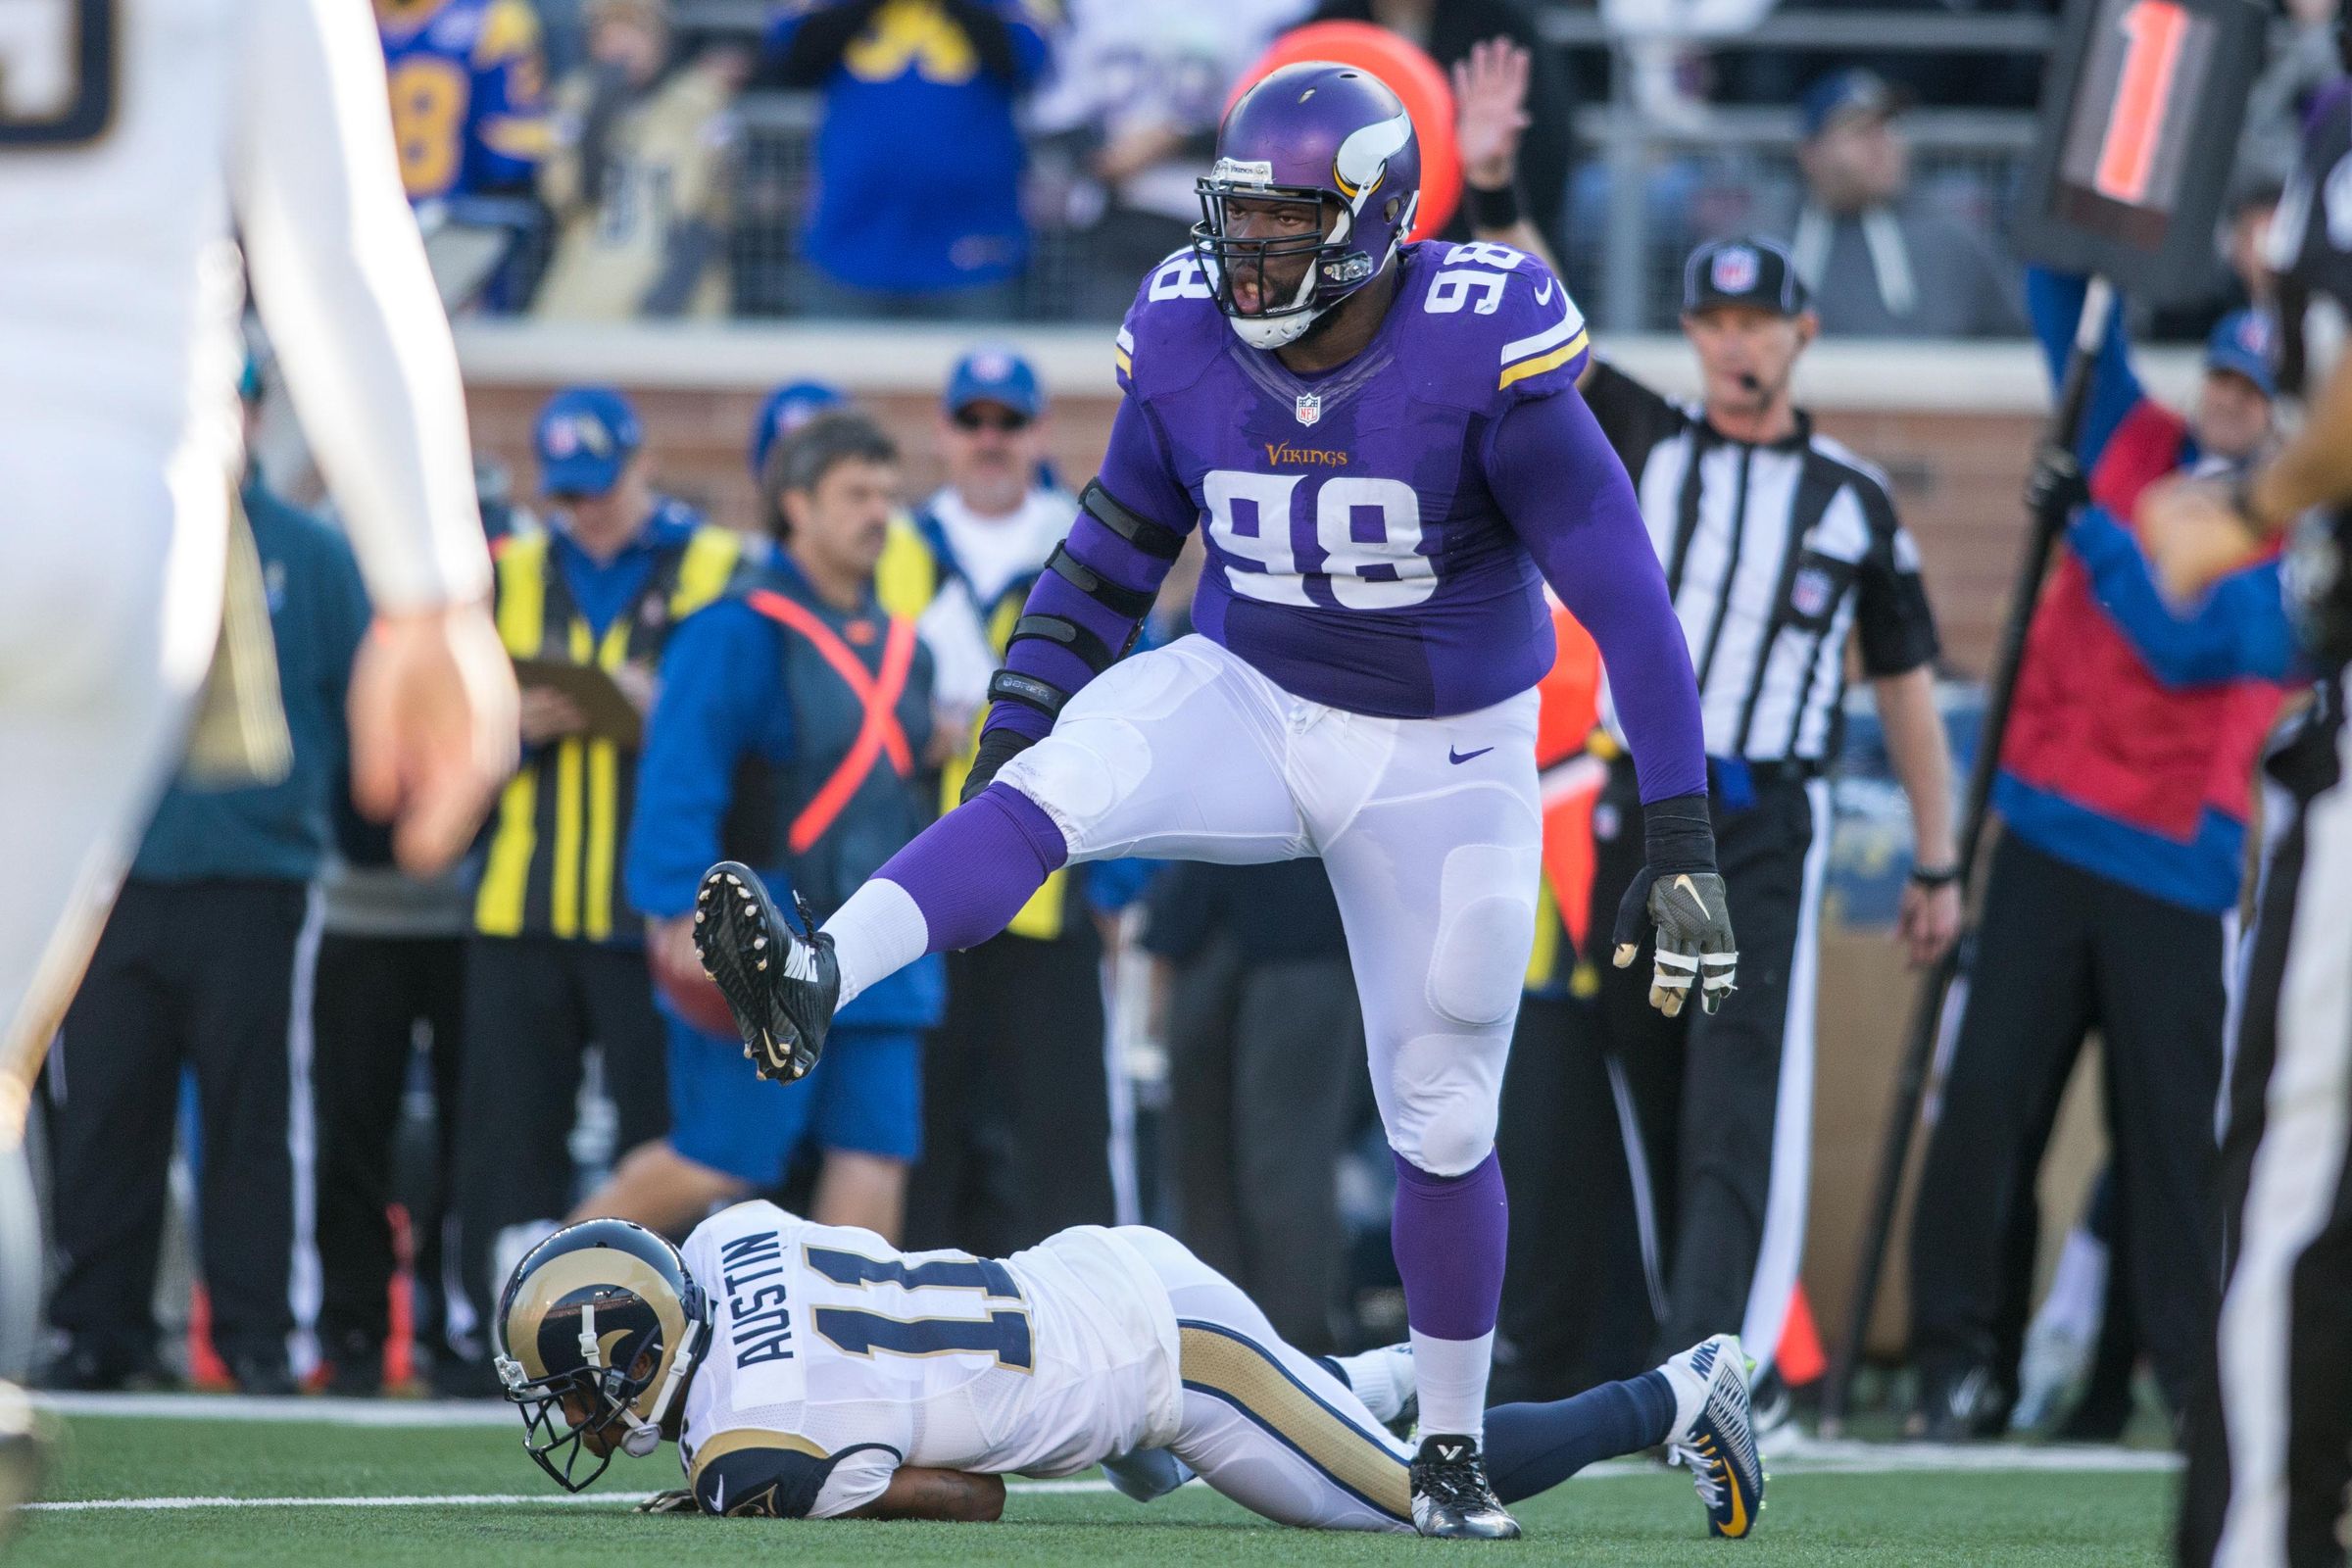 St. Croix's Linval Joseph: I Want Aaron Rodgers Because The